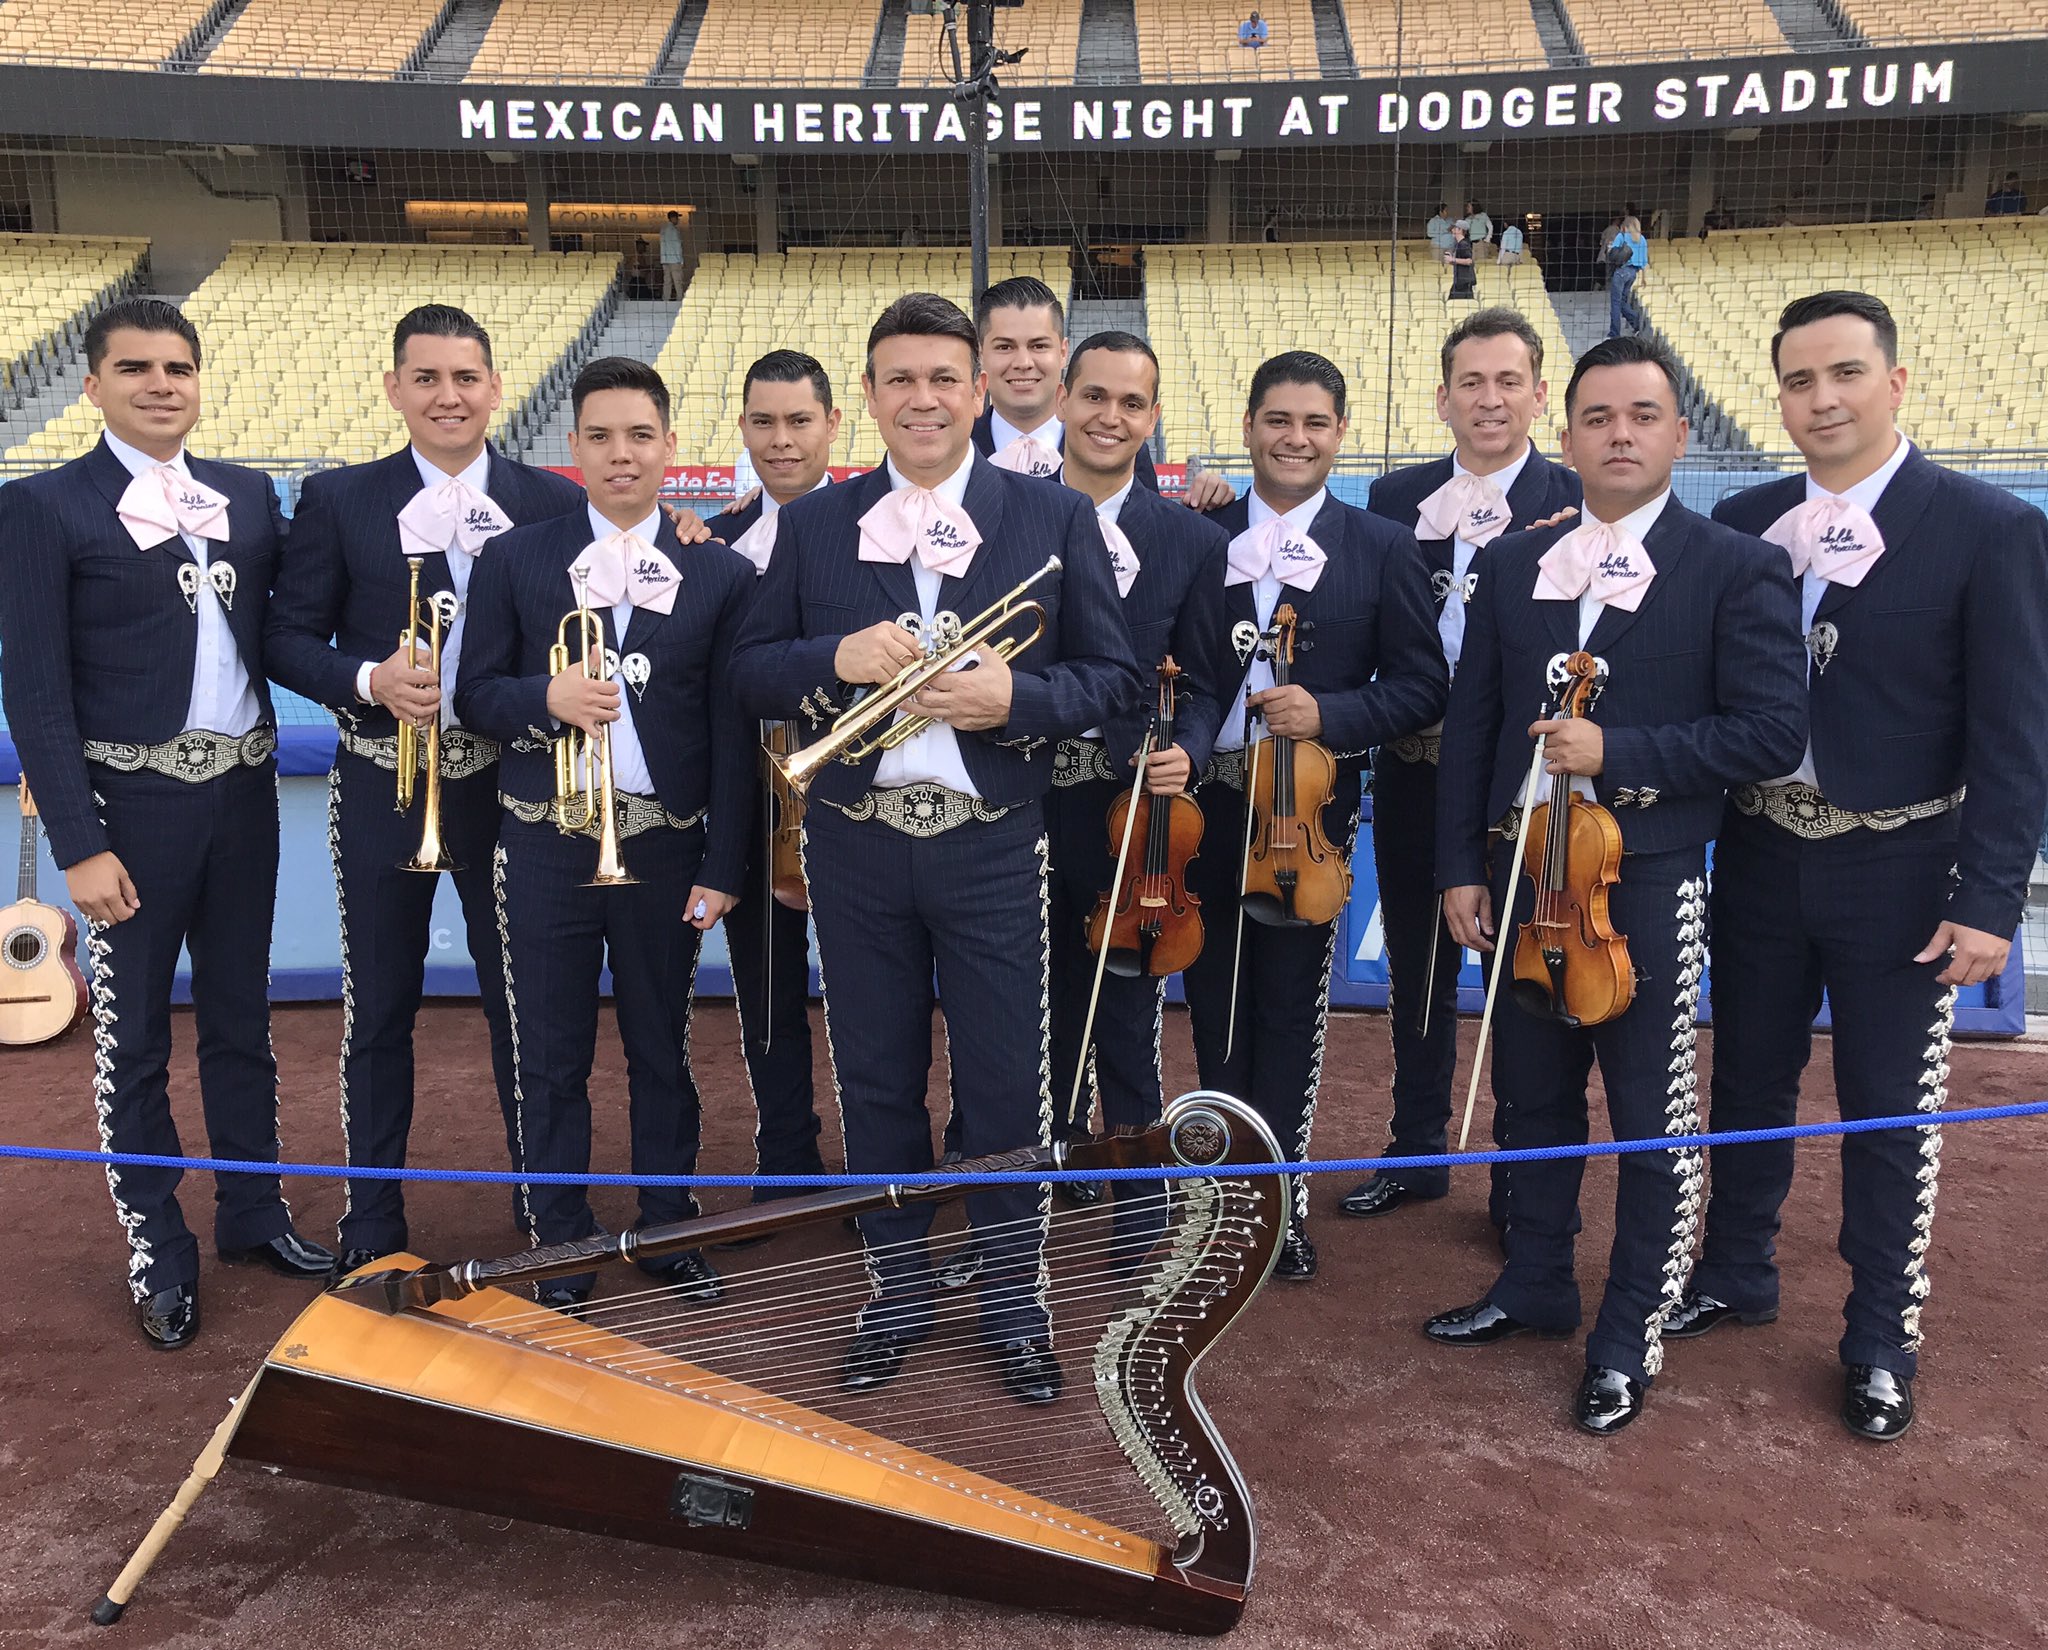 2021 Dodgers Promotions: Mexican Heritage Night, Teachers Appreciation &  More At Dodger Stadium